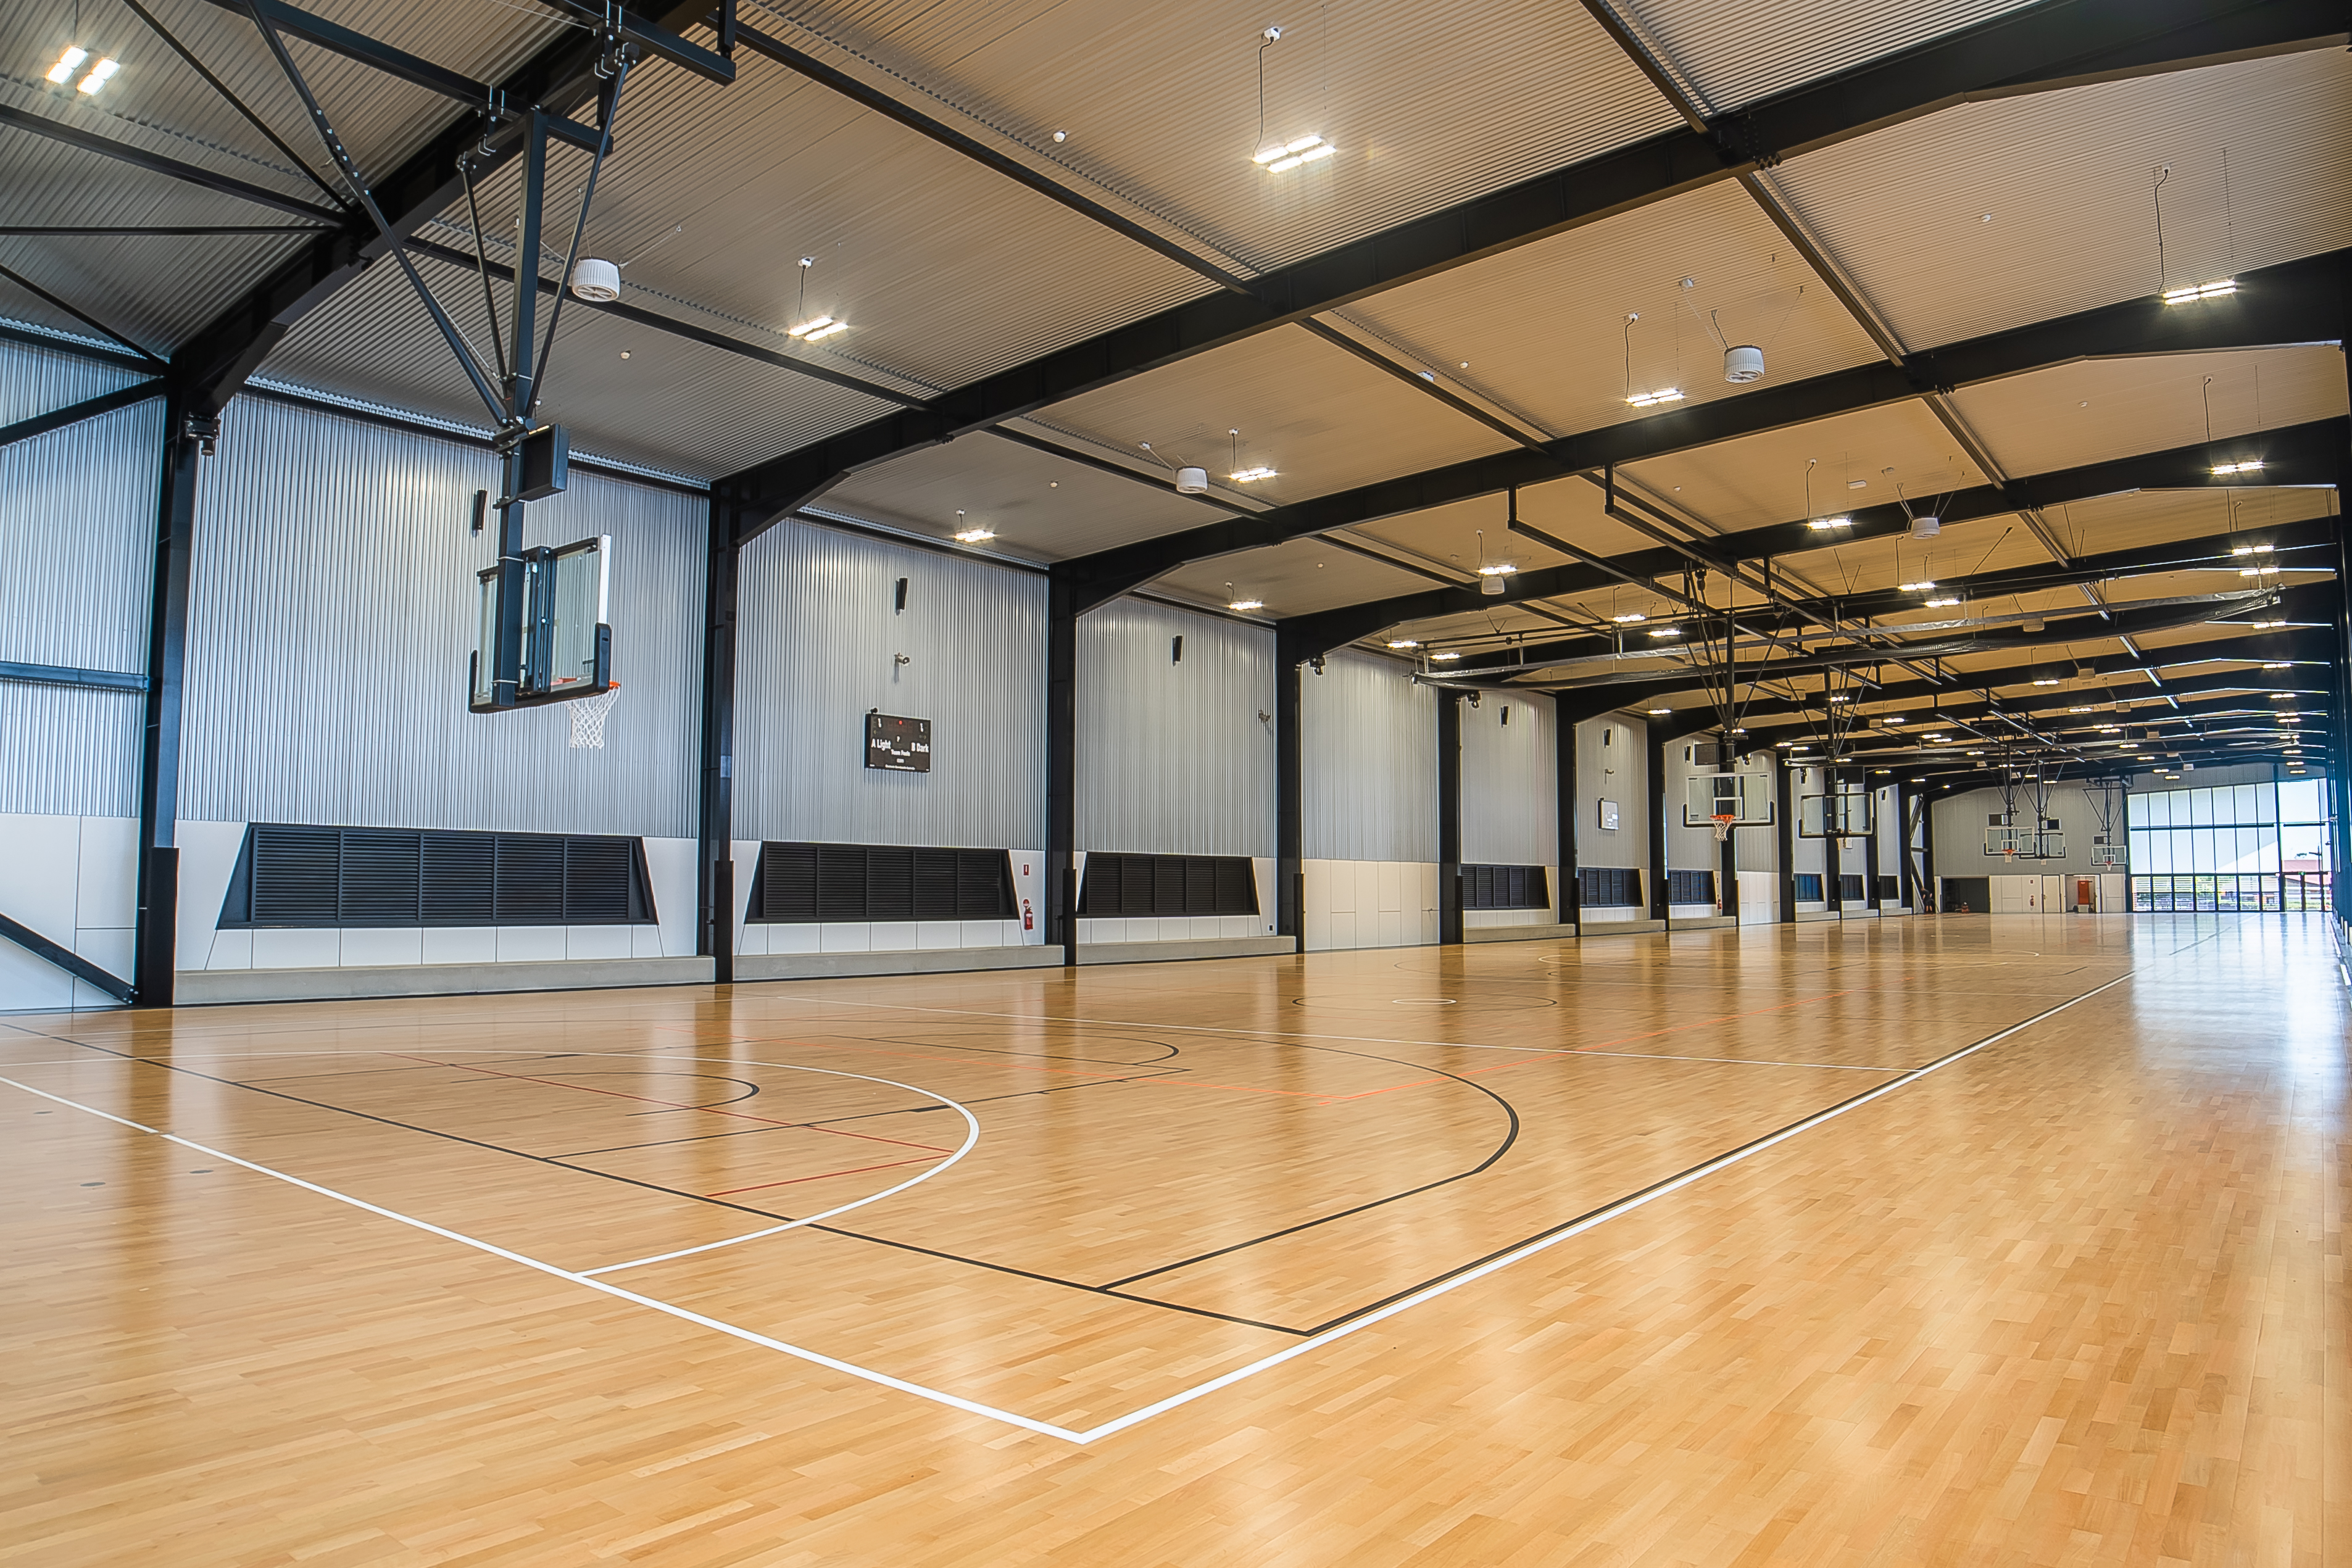 Indoor multi-purpose courts at the Townsville Sports Precinct.